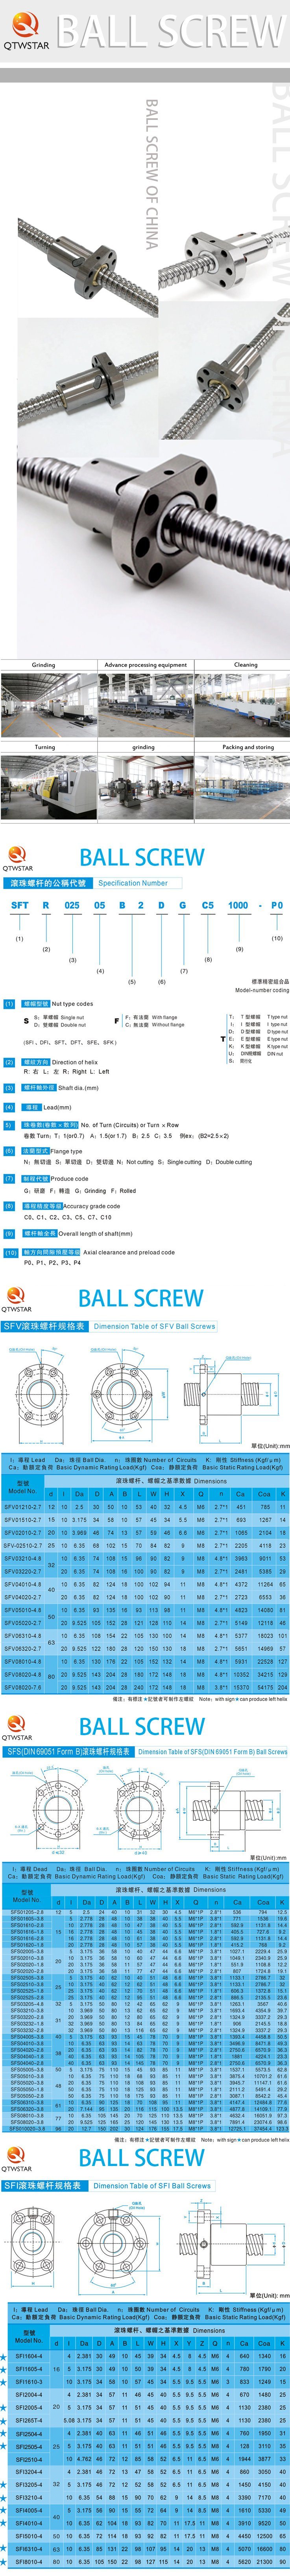 Oman Calculation of Screw and Ball Screw Thrust, Trapezoidal Screw and Ball Screw Thrust Calculation